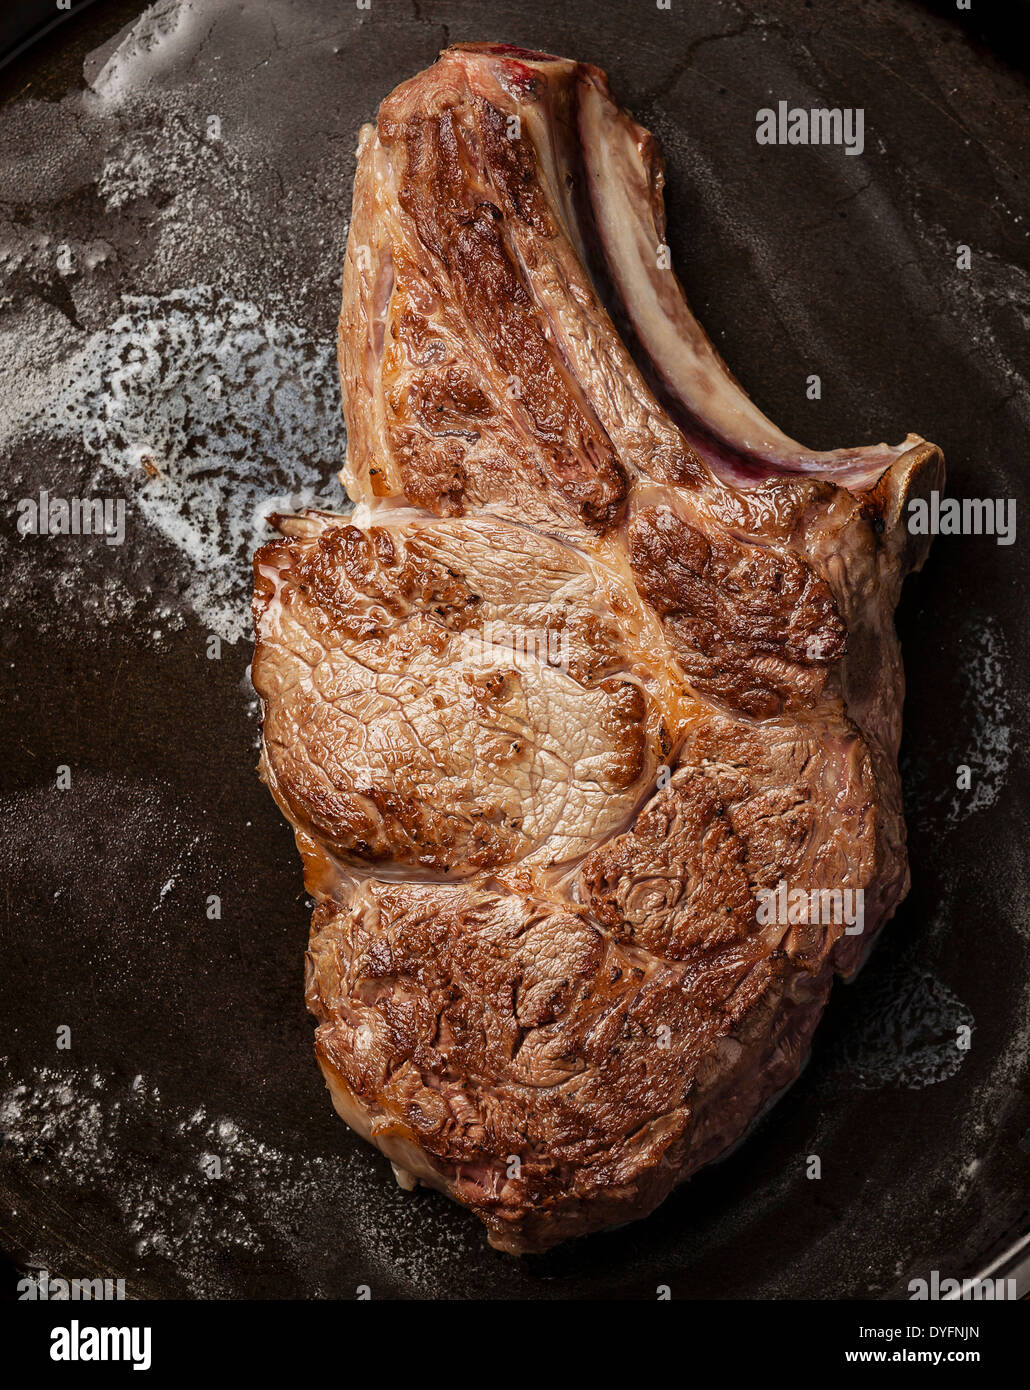 Veal cutlet with bone on pan Stock Photo